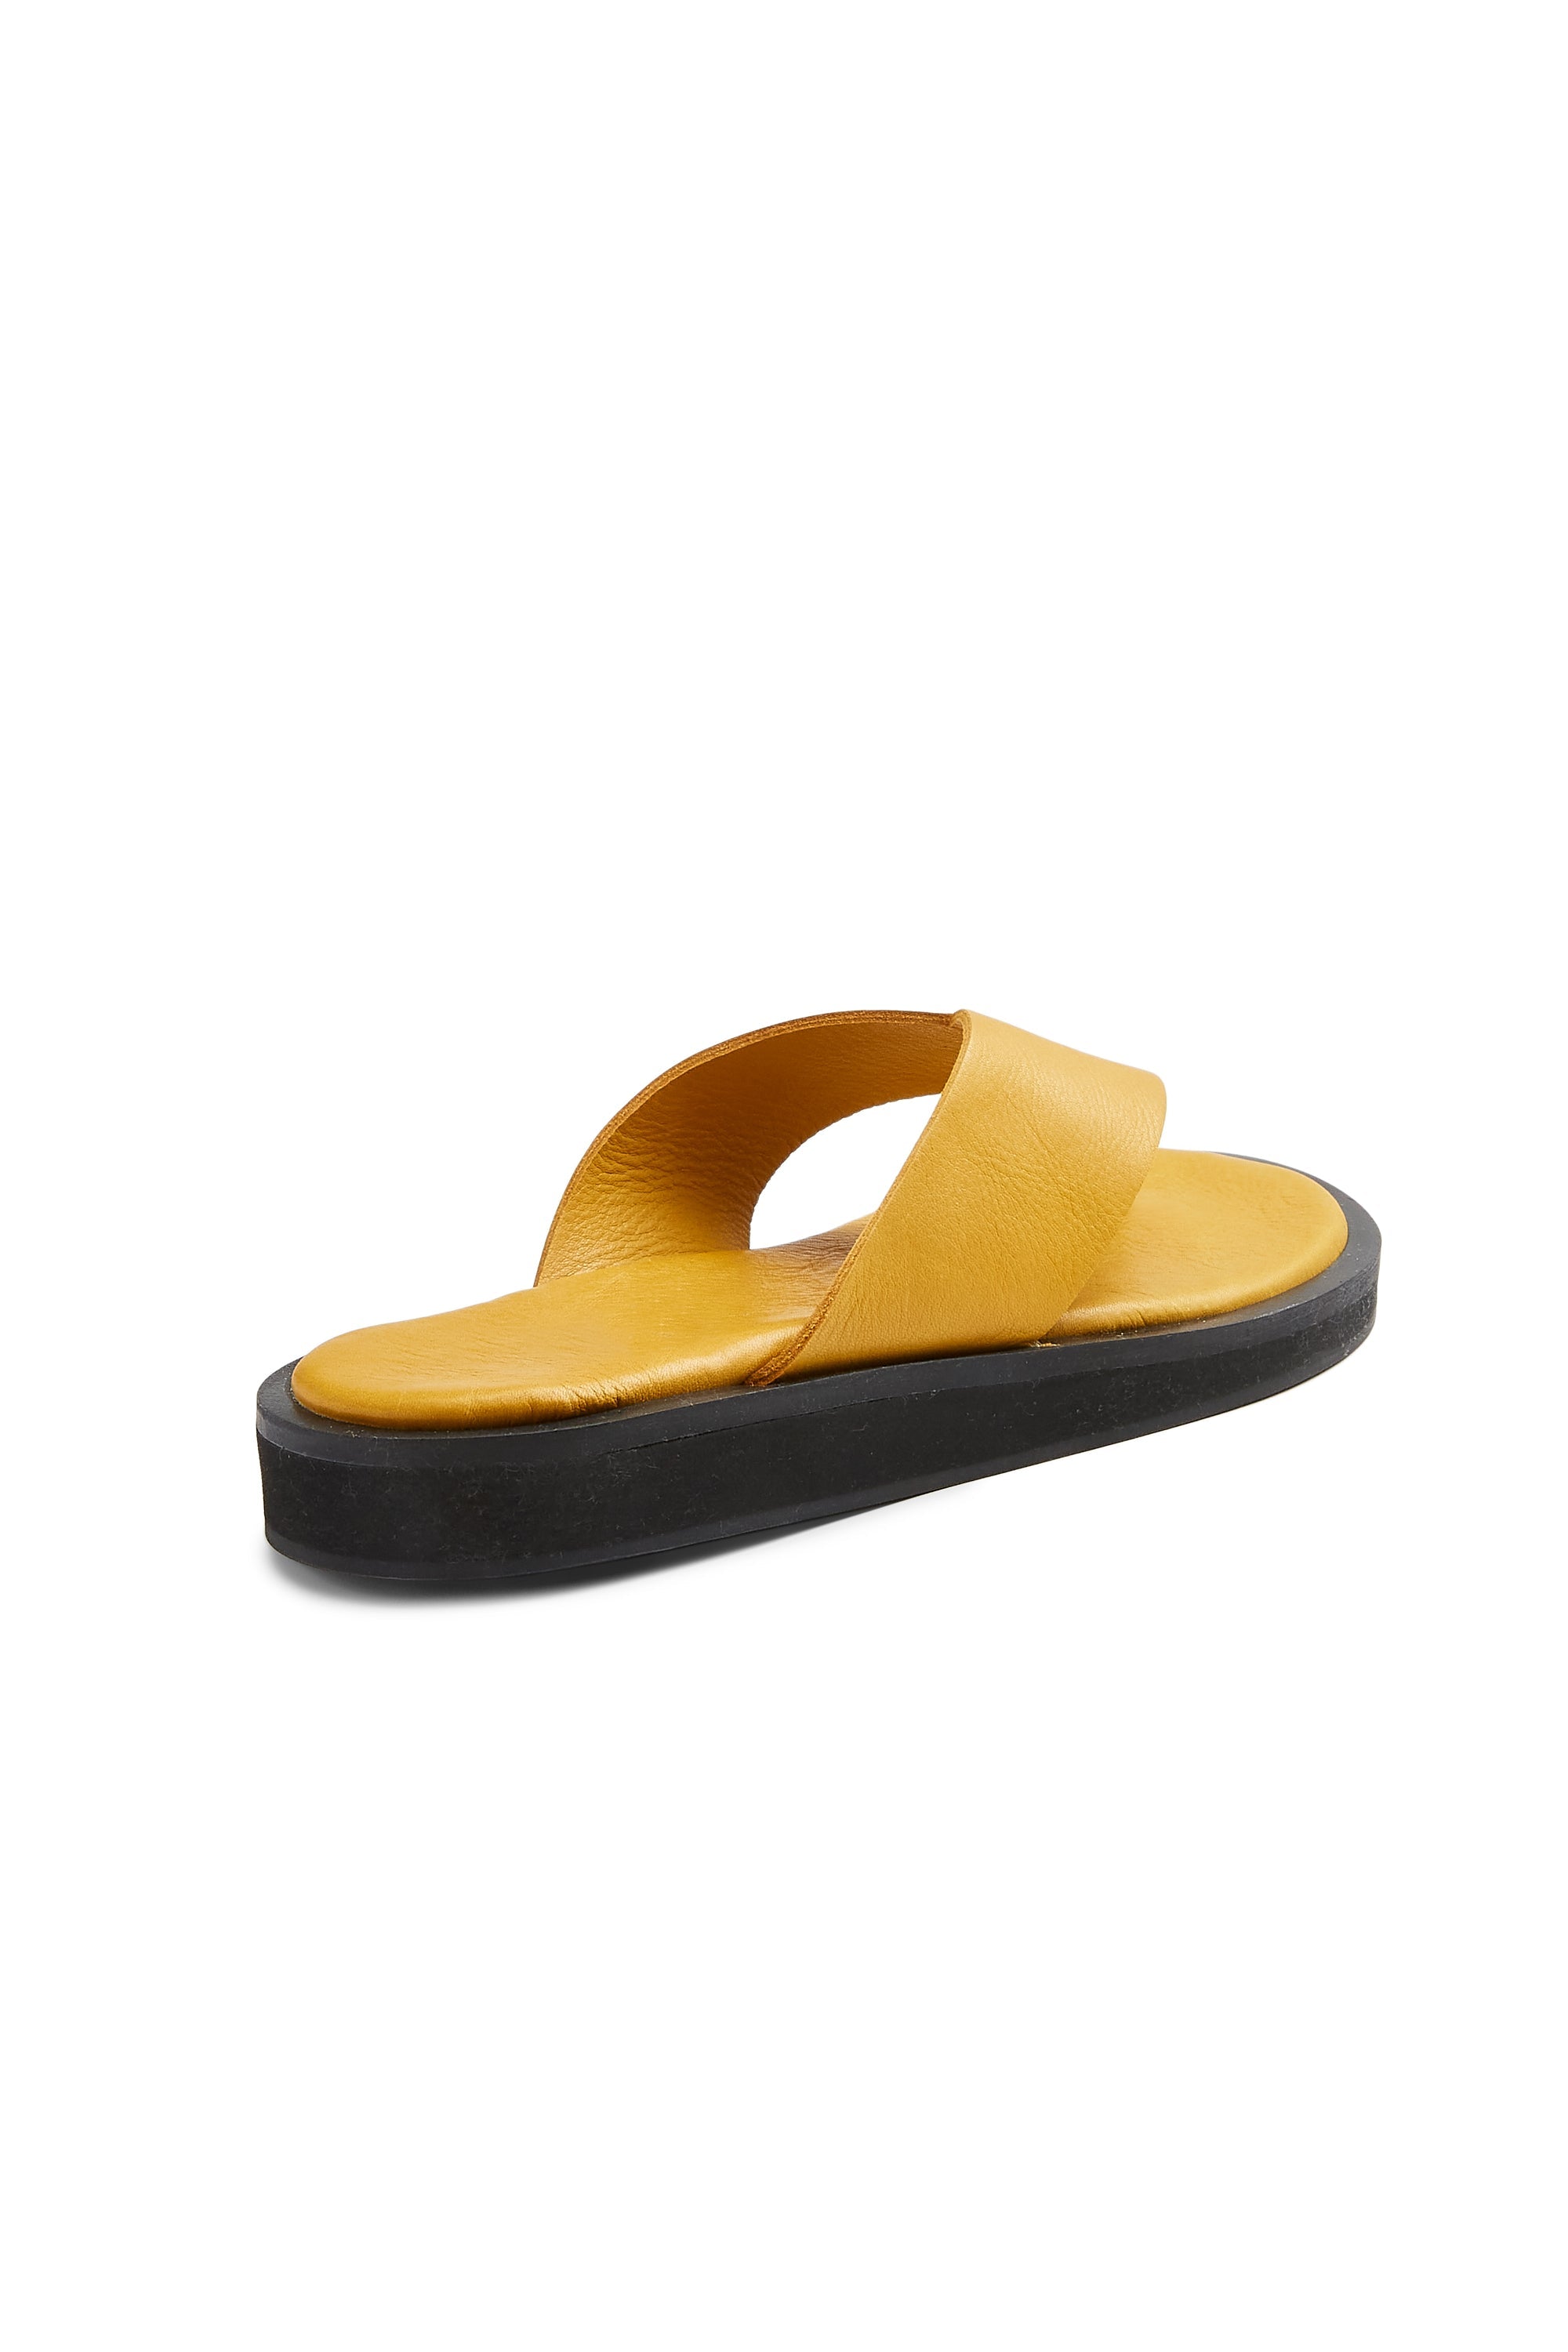 leather thong in mustard - ships end of April Thongs lisa b. 